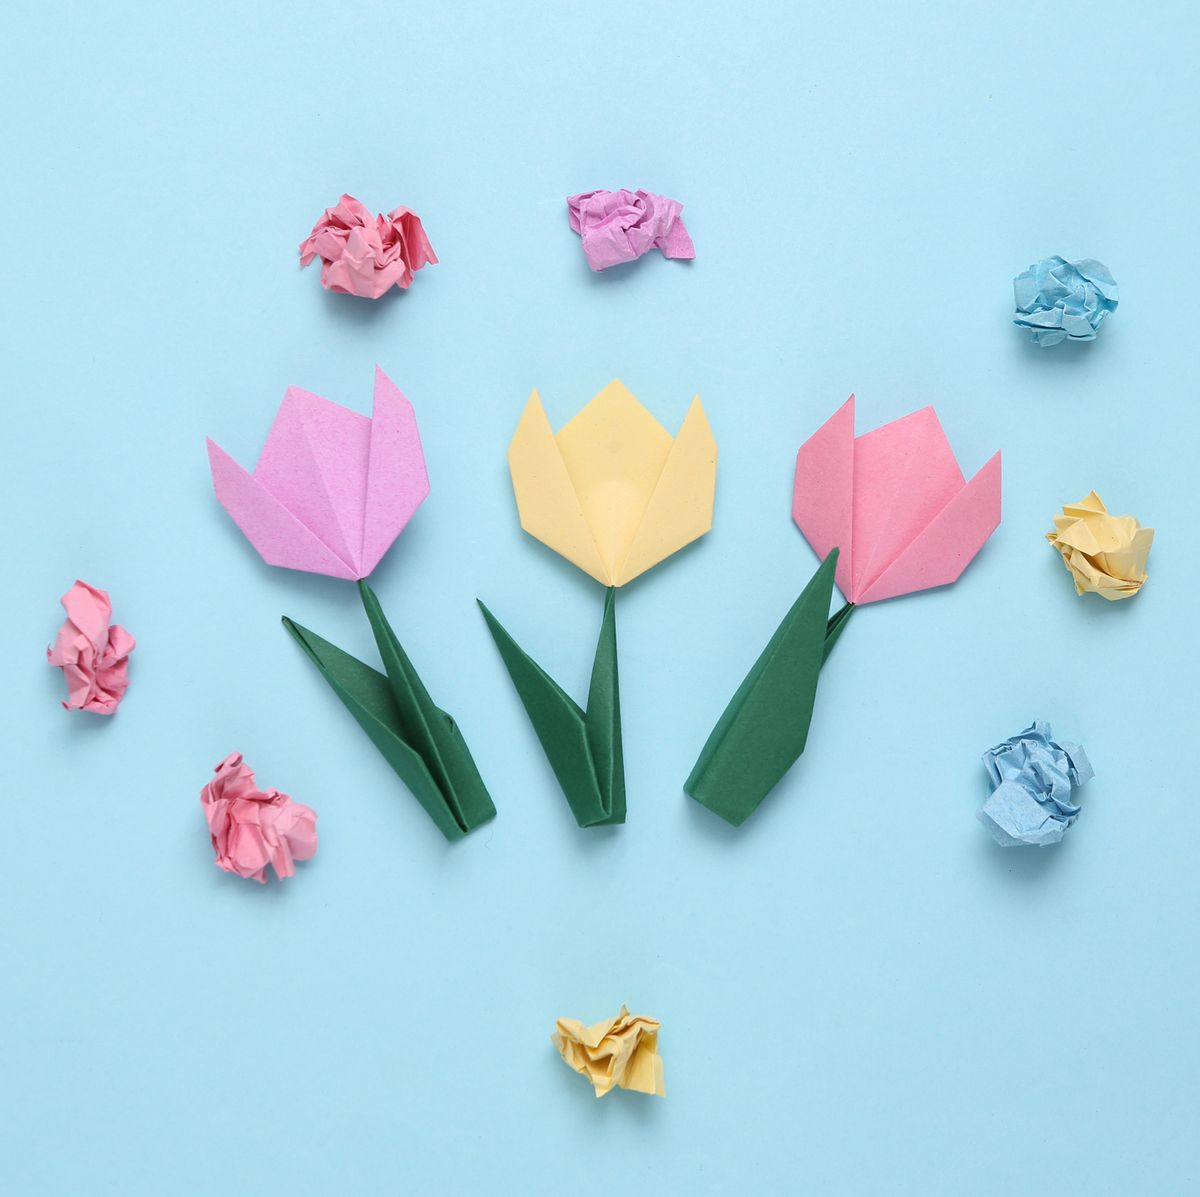 Origami for beginners: How to make folded flowers